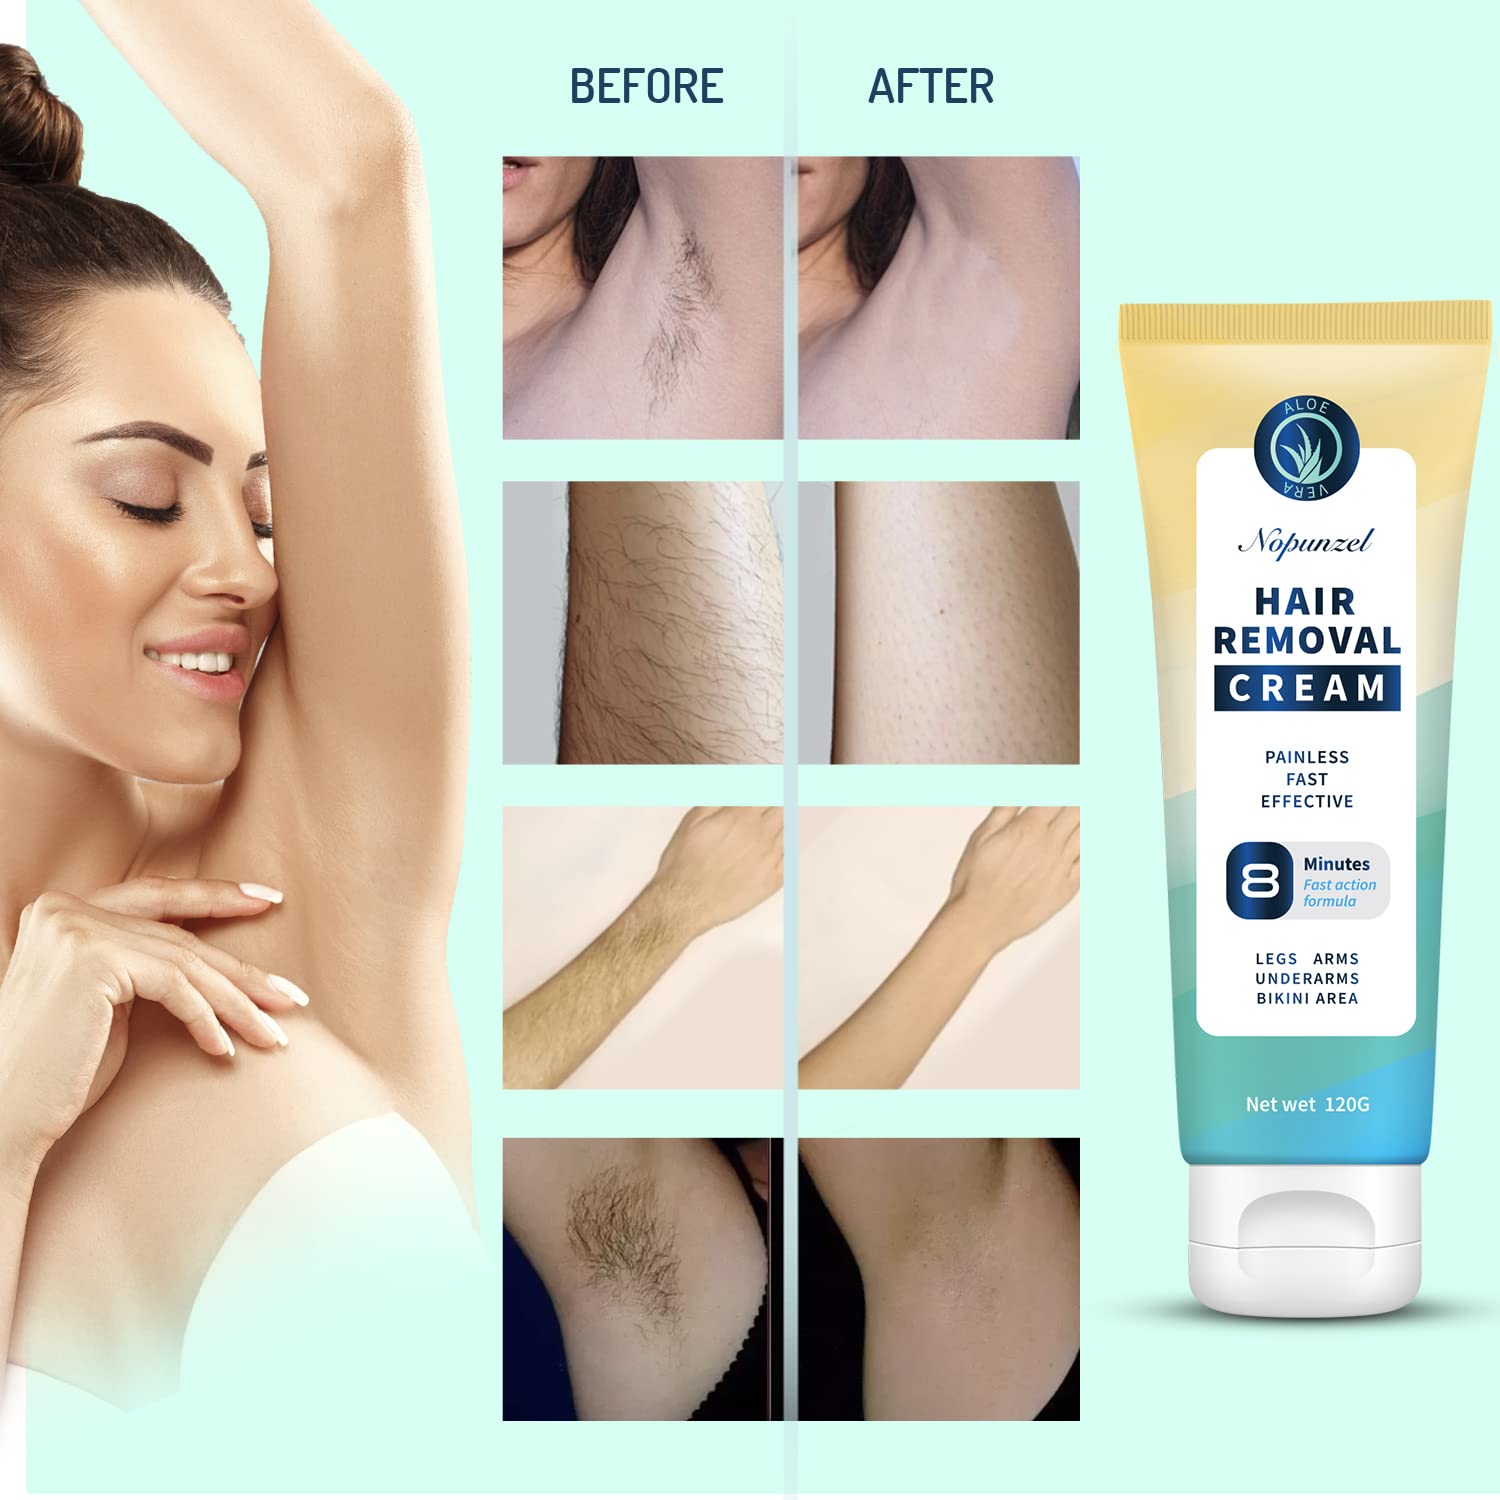 Nopunzel Hair Removal Cream: Hair Removal For Women and Men - Painless Hair Remover Cream for Pubic Hair - Private Areas Bikini Area Body Legs Arms Underarms - Skin Friendly - Depilatory Cream - 120g : Beauty & Personal Care